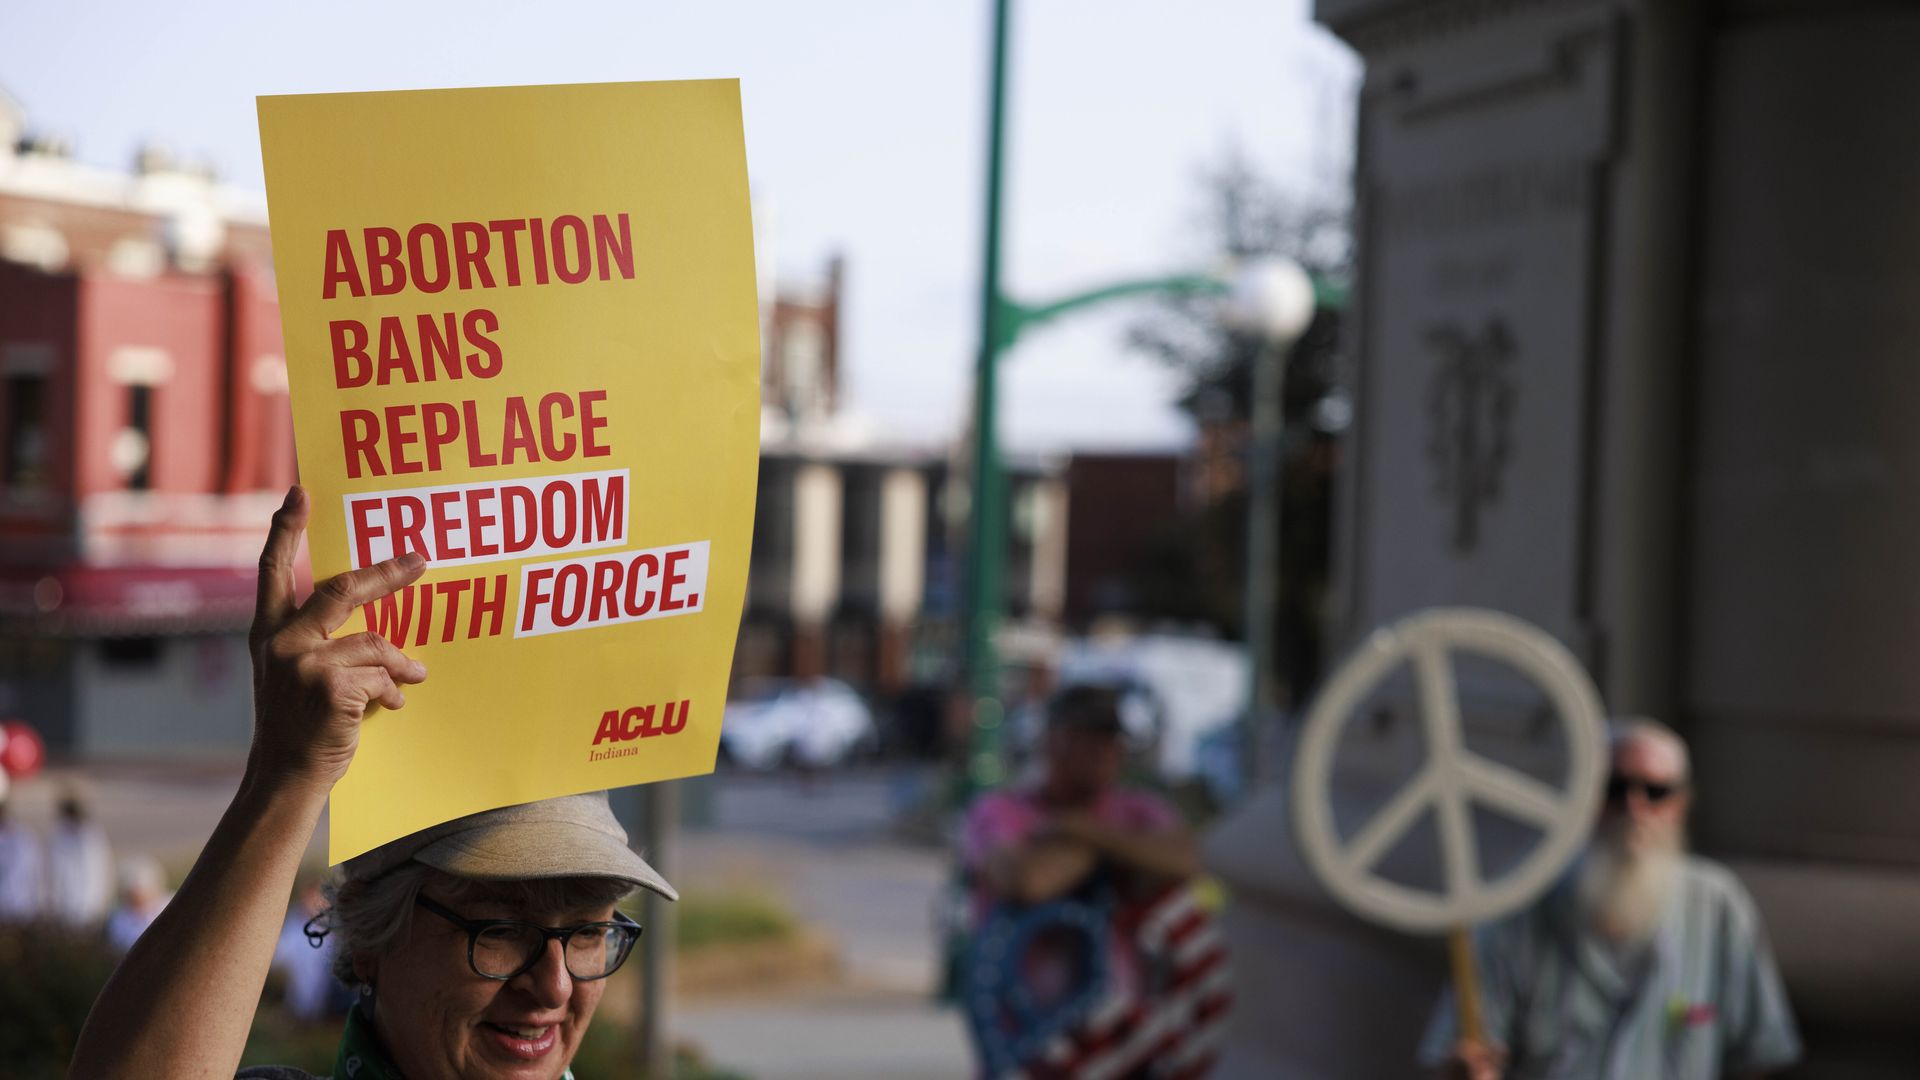 Picture of a person holding a yellow sign that says "abortion bans replace freedom with force"